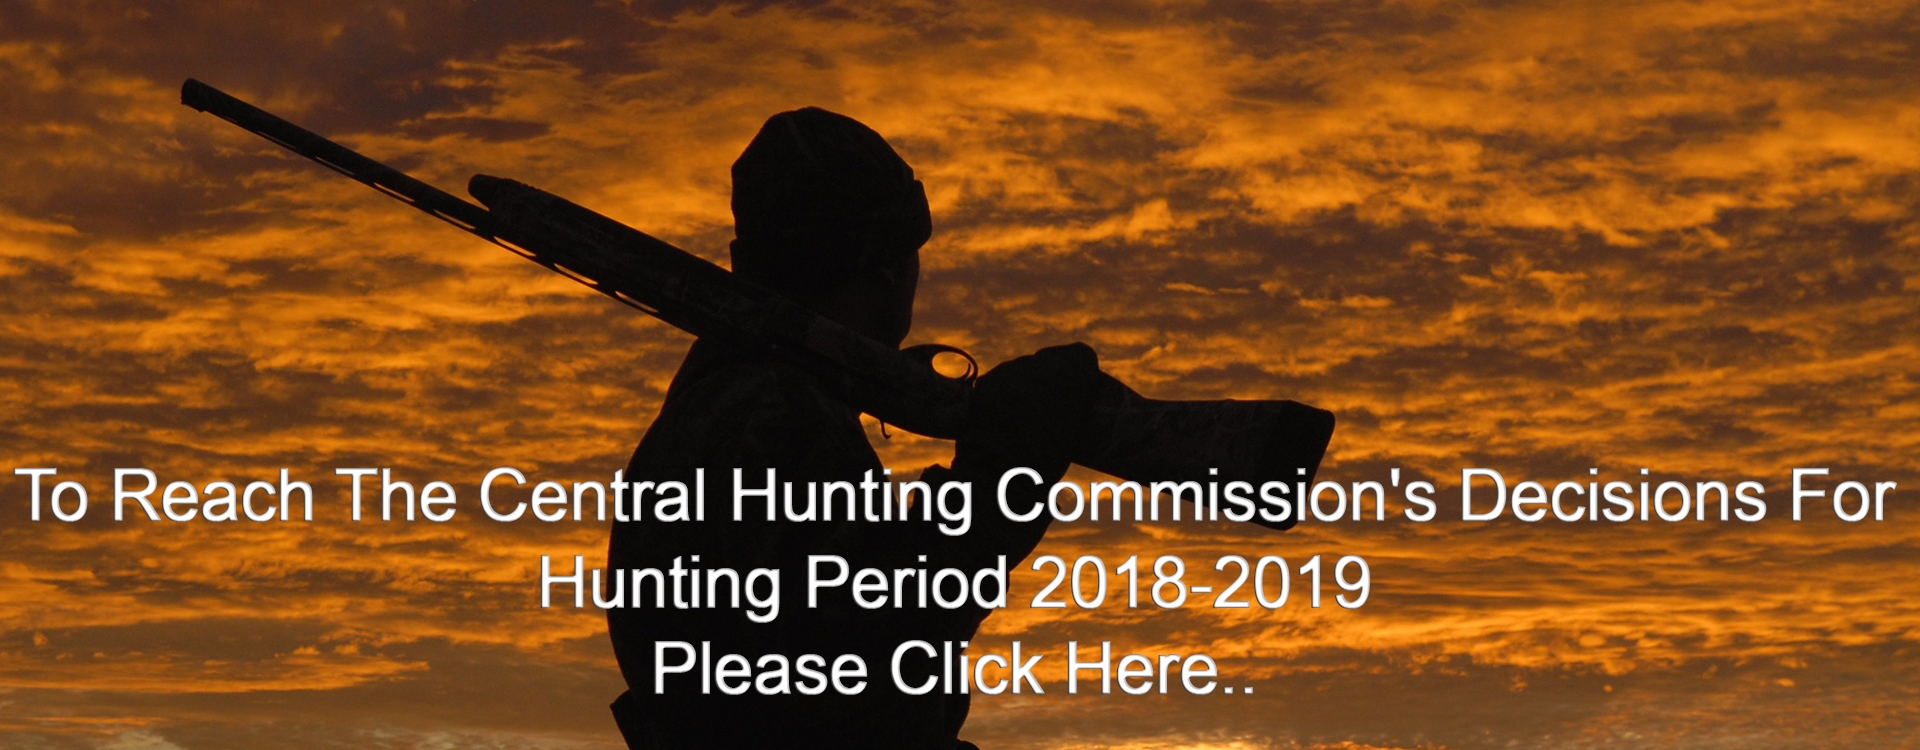 Central Hunting Commission's Decisions For Hunting Period 18-19